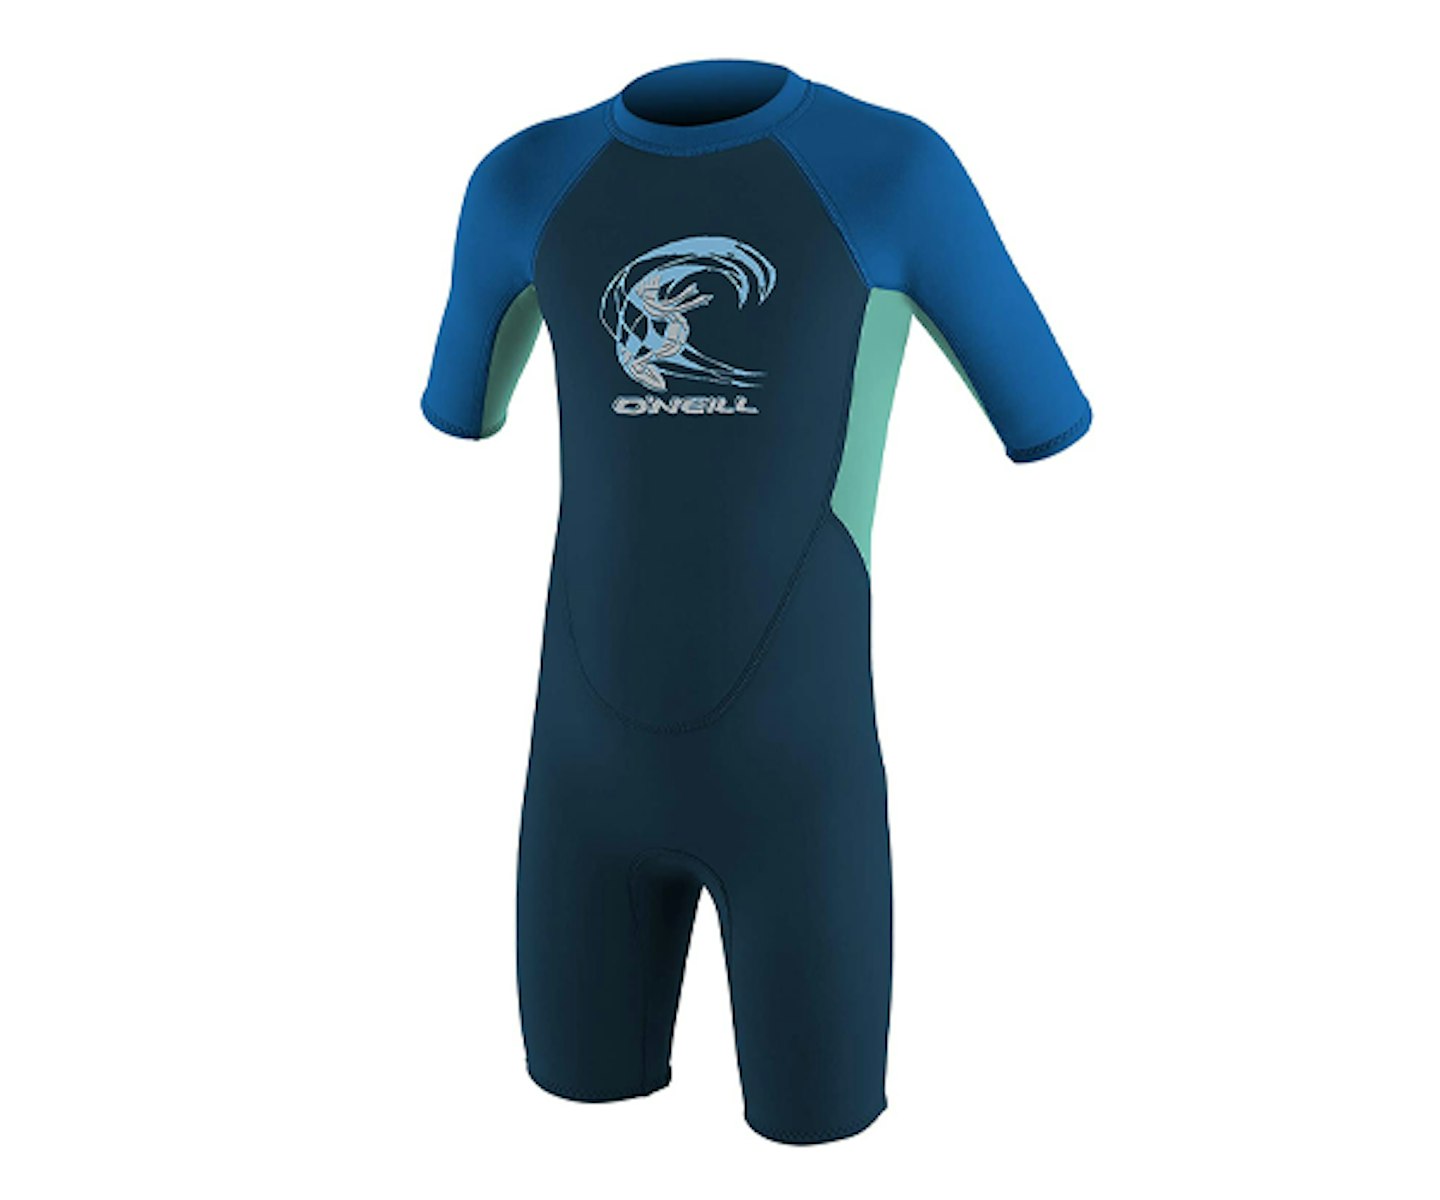 O'neill wetsuit